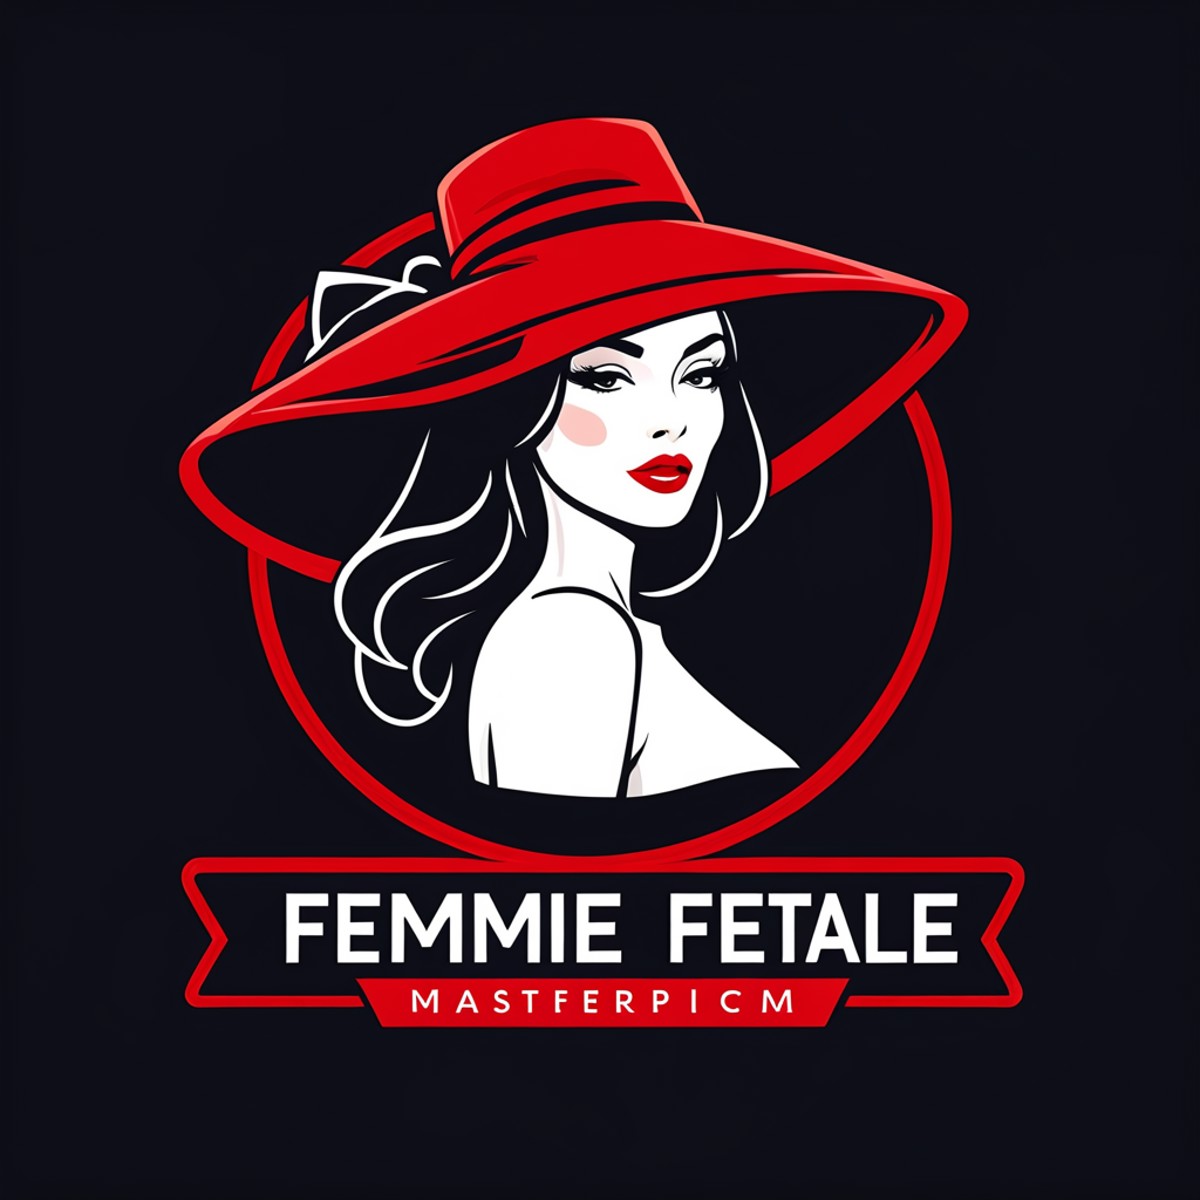 logomkrdsxl, outline logo of woman wearing big hat and sexy red dress, simplistic art, logo,  vector, text "femme fetale",...